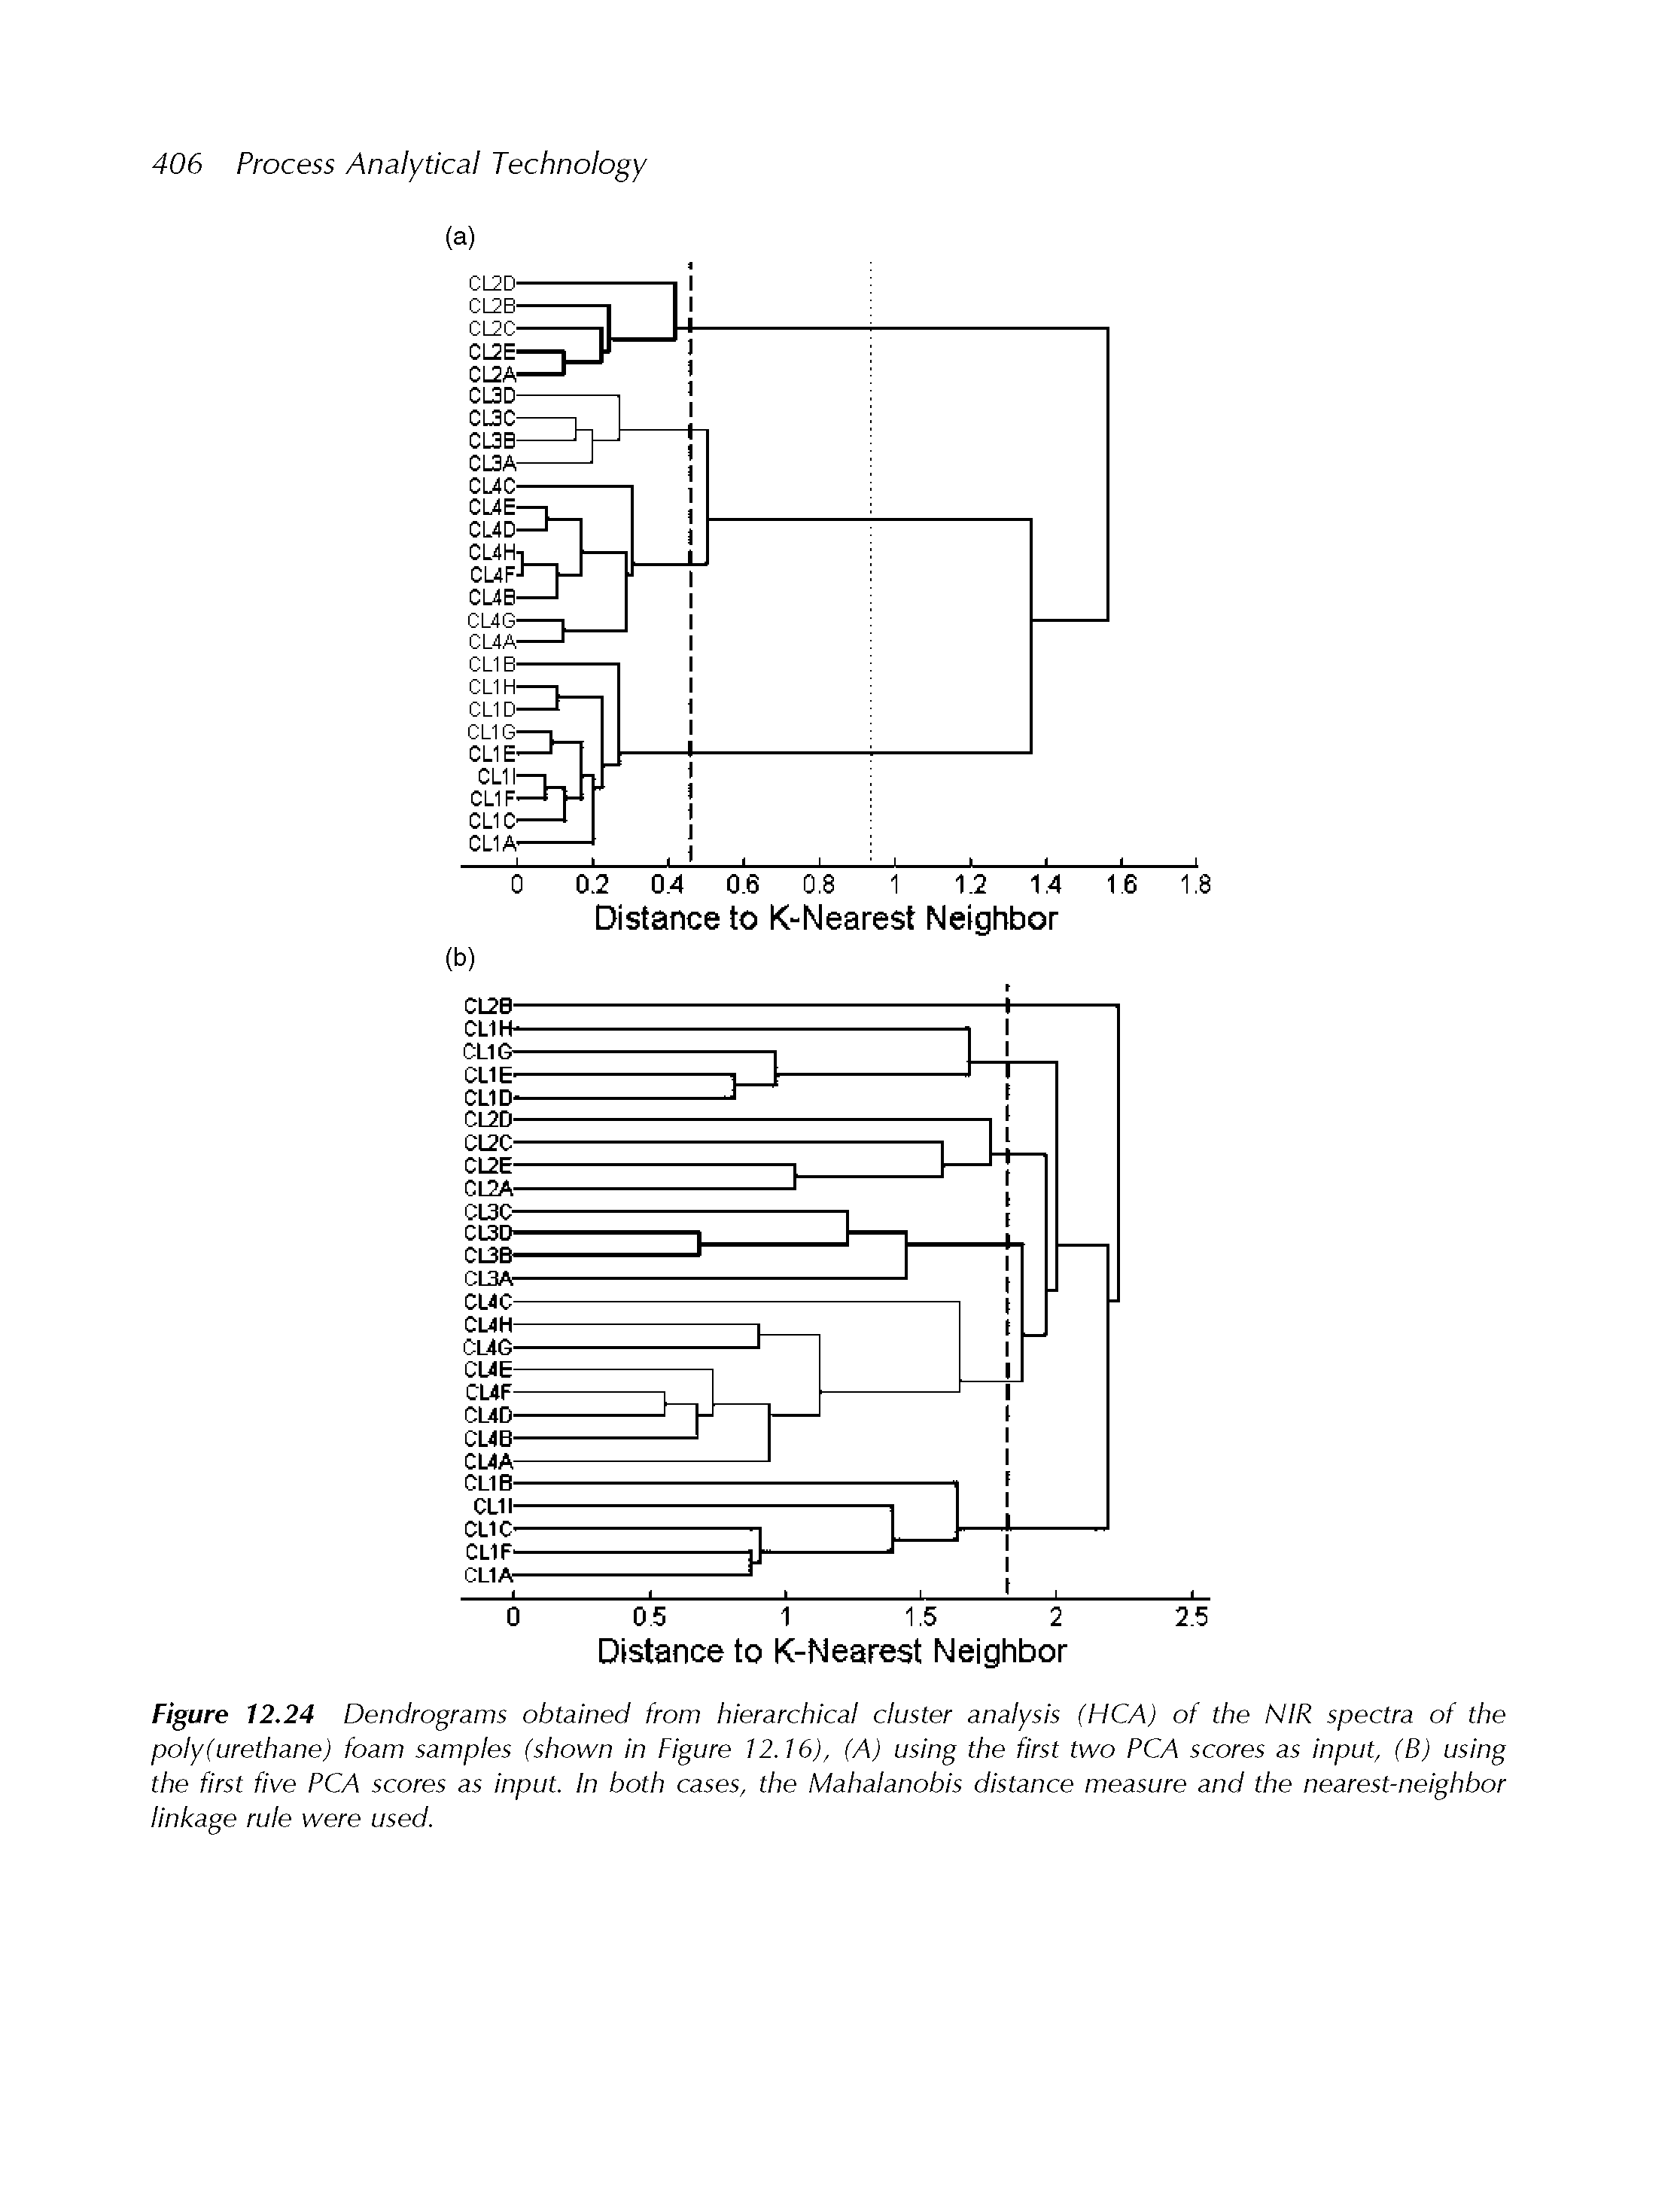 Figure 12.24 Dendrograms obtained from hierarchical cluster analysis (HCA) of the NIR. spectra of the poly(urethane) foam samples (shown in Figure 12.16), (A) using the first two PCA scores as input, (B) using the first five PCA scores as input. In both cases, the Mahalanobis distance measure and the nearest-neighbor linkage rule were used.